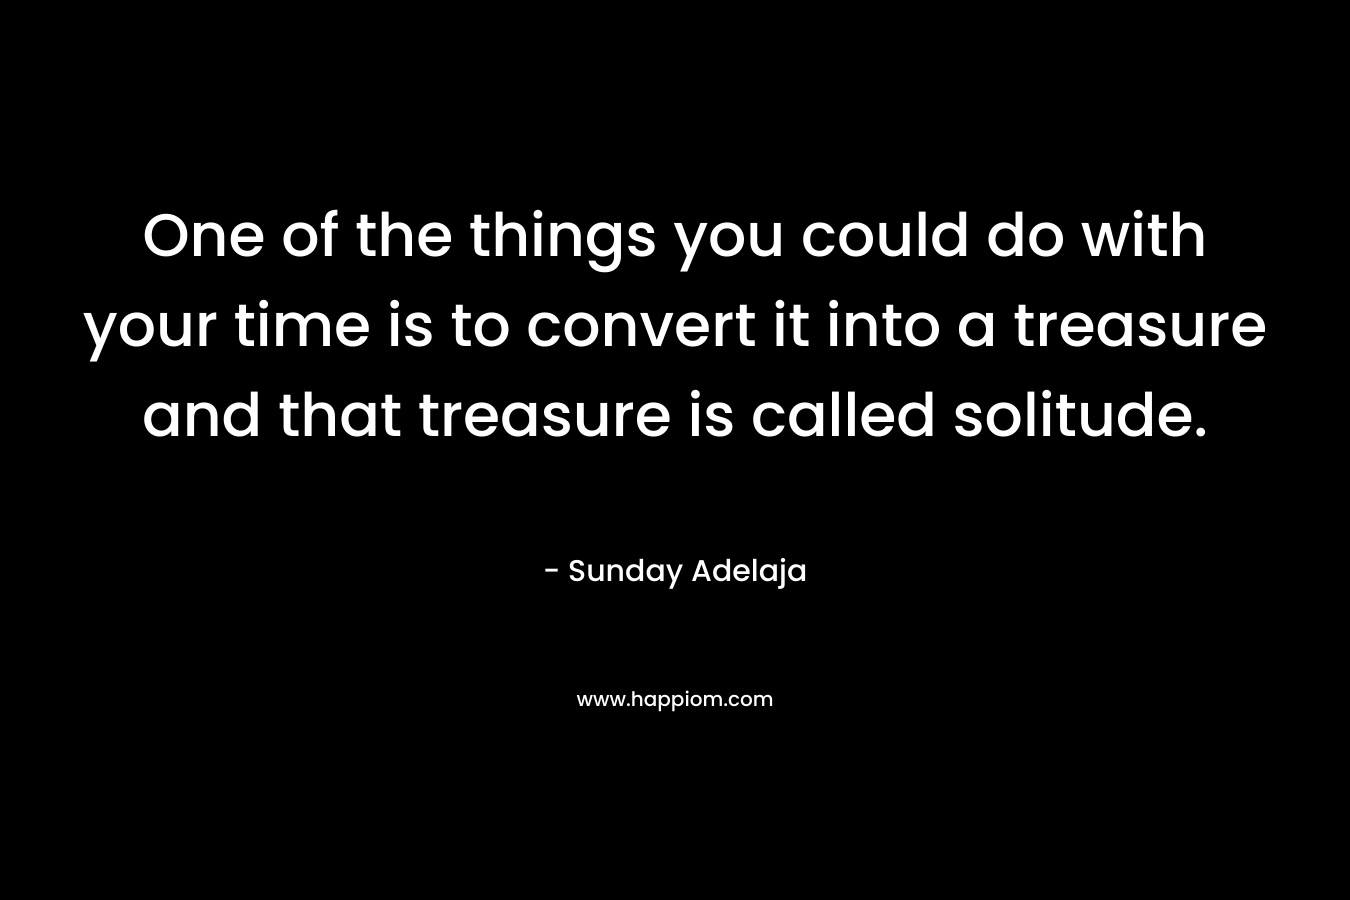 One of the things you could do with your time is to convert it into a treasure and that treasure is called solitude.